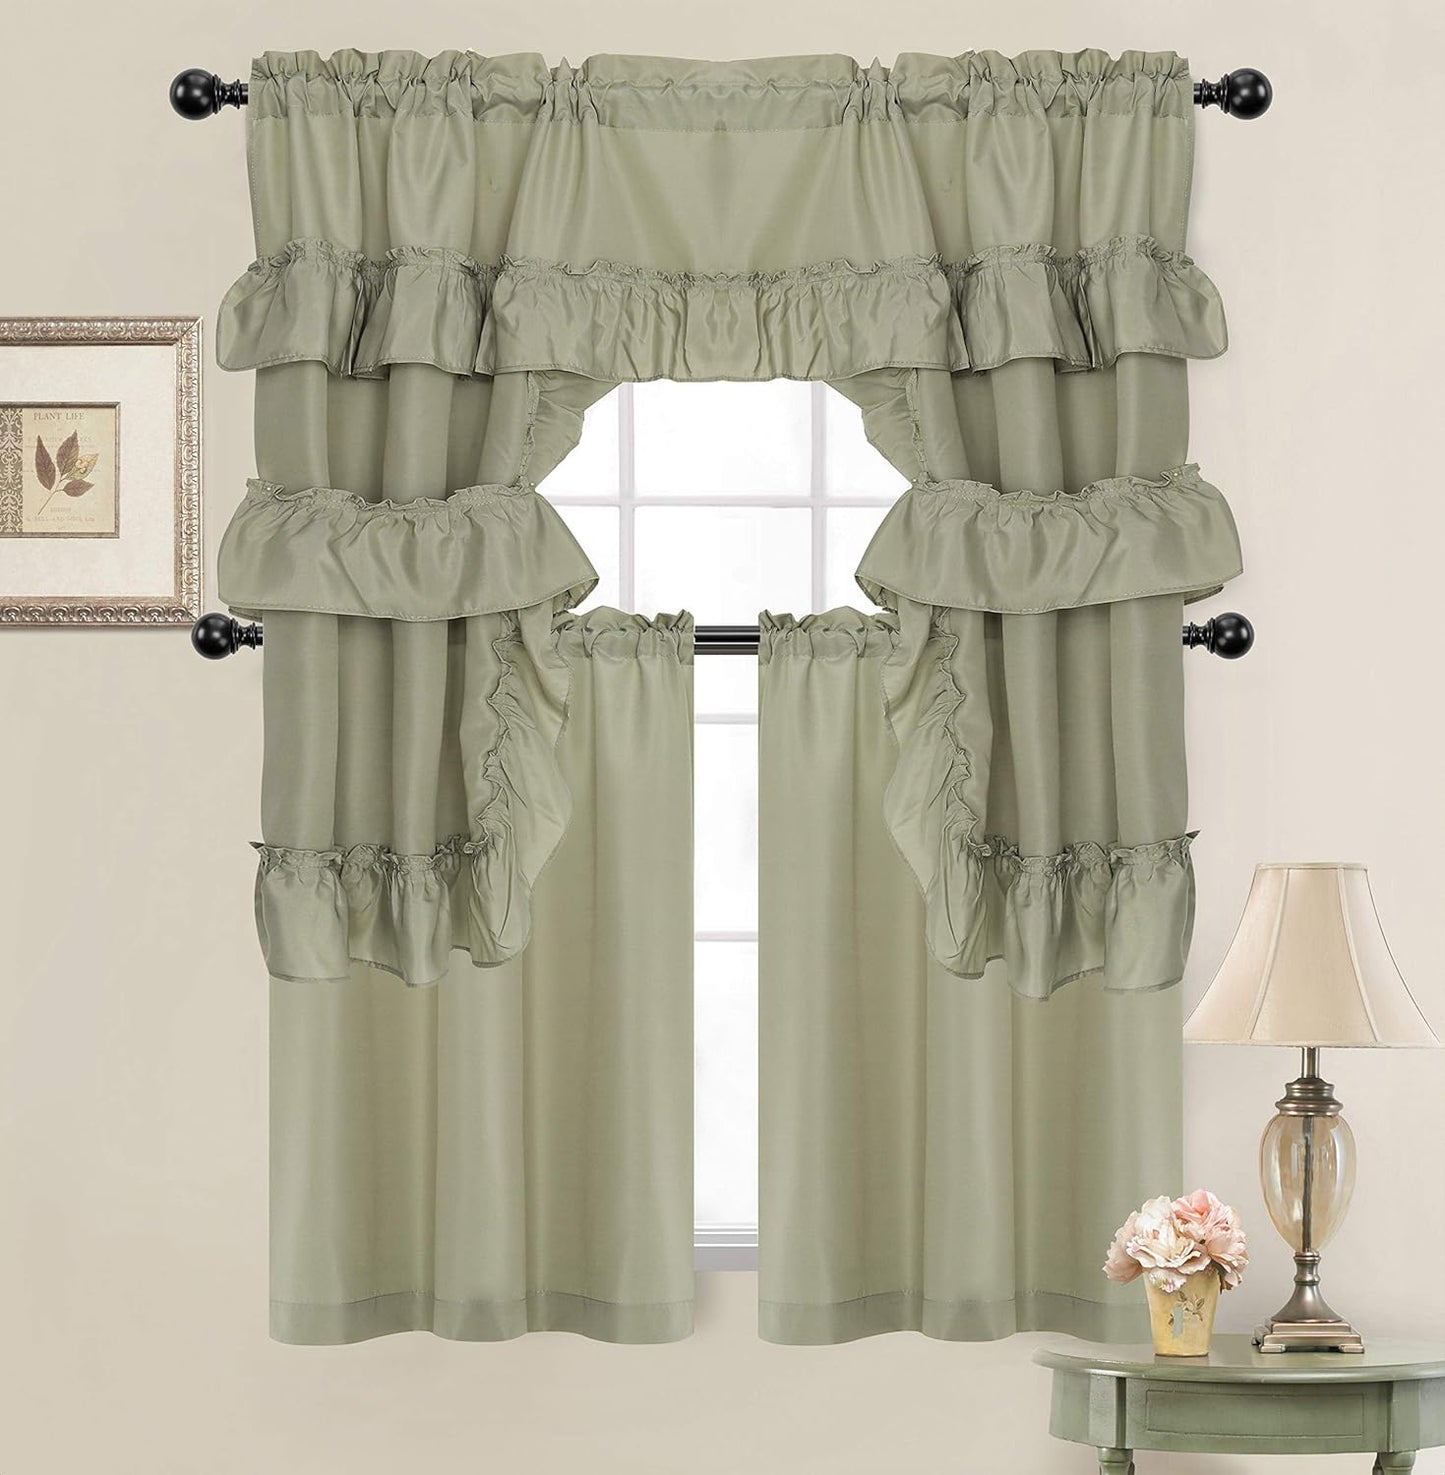 Goodgram Country Farmhouse Living Solid Colored Cafe Kitchen Curtain Tier & Swag Valance Set - Assorted Colors (White)  GoodGram Sage Green  